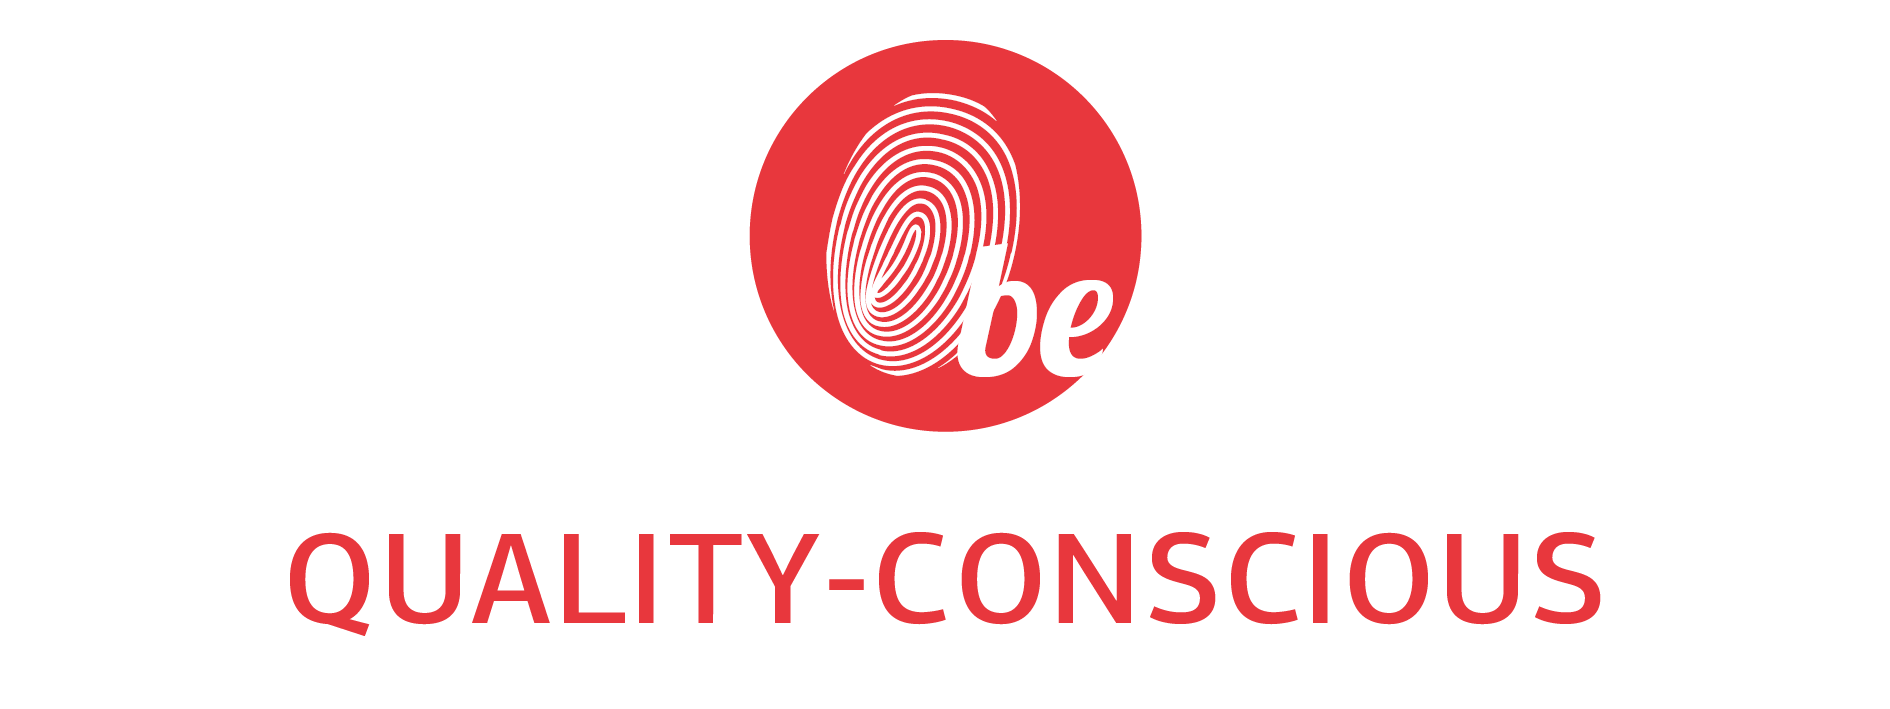 be quality-concious